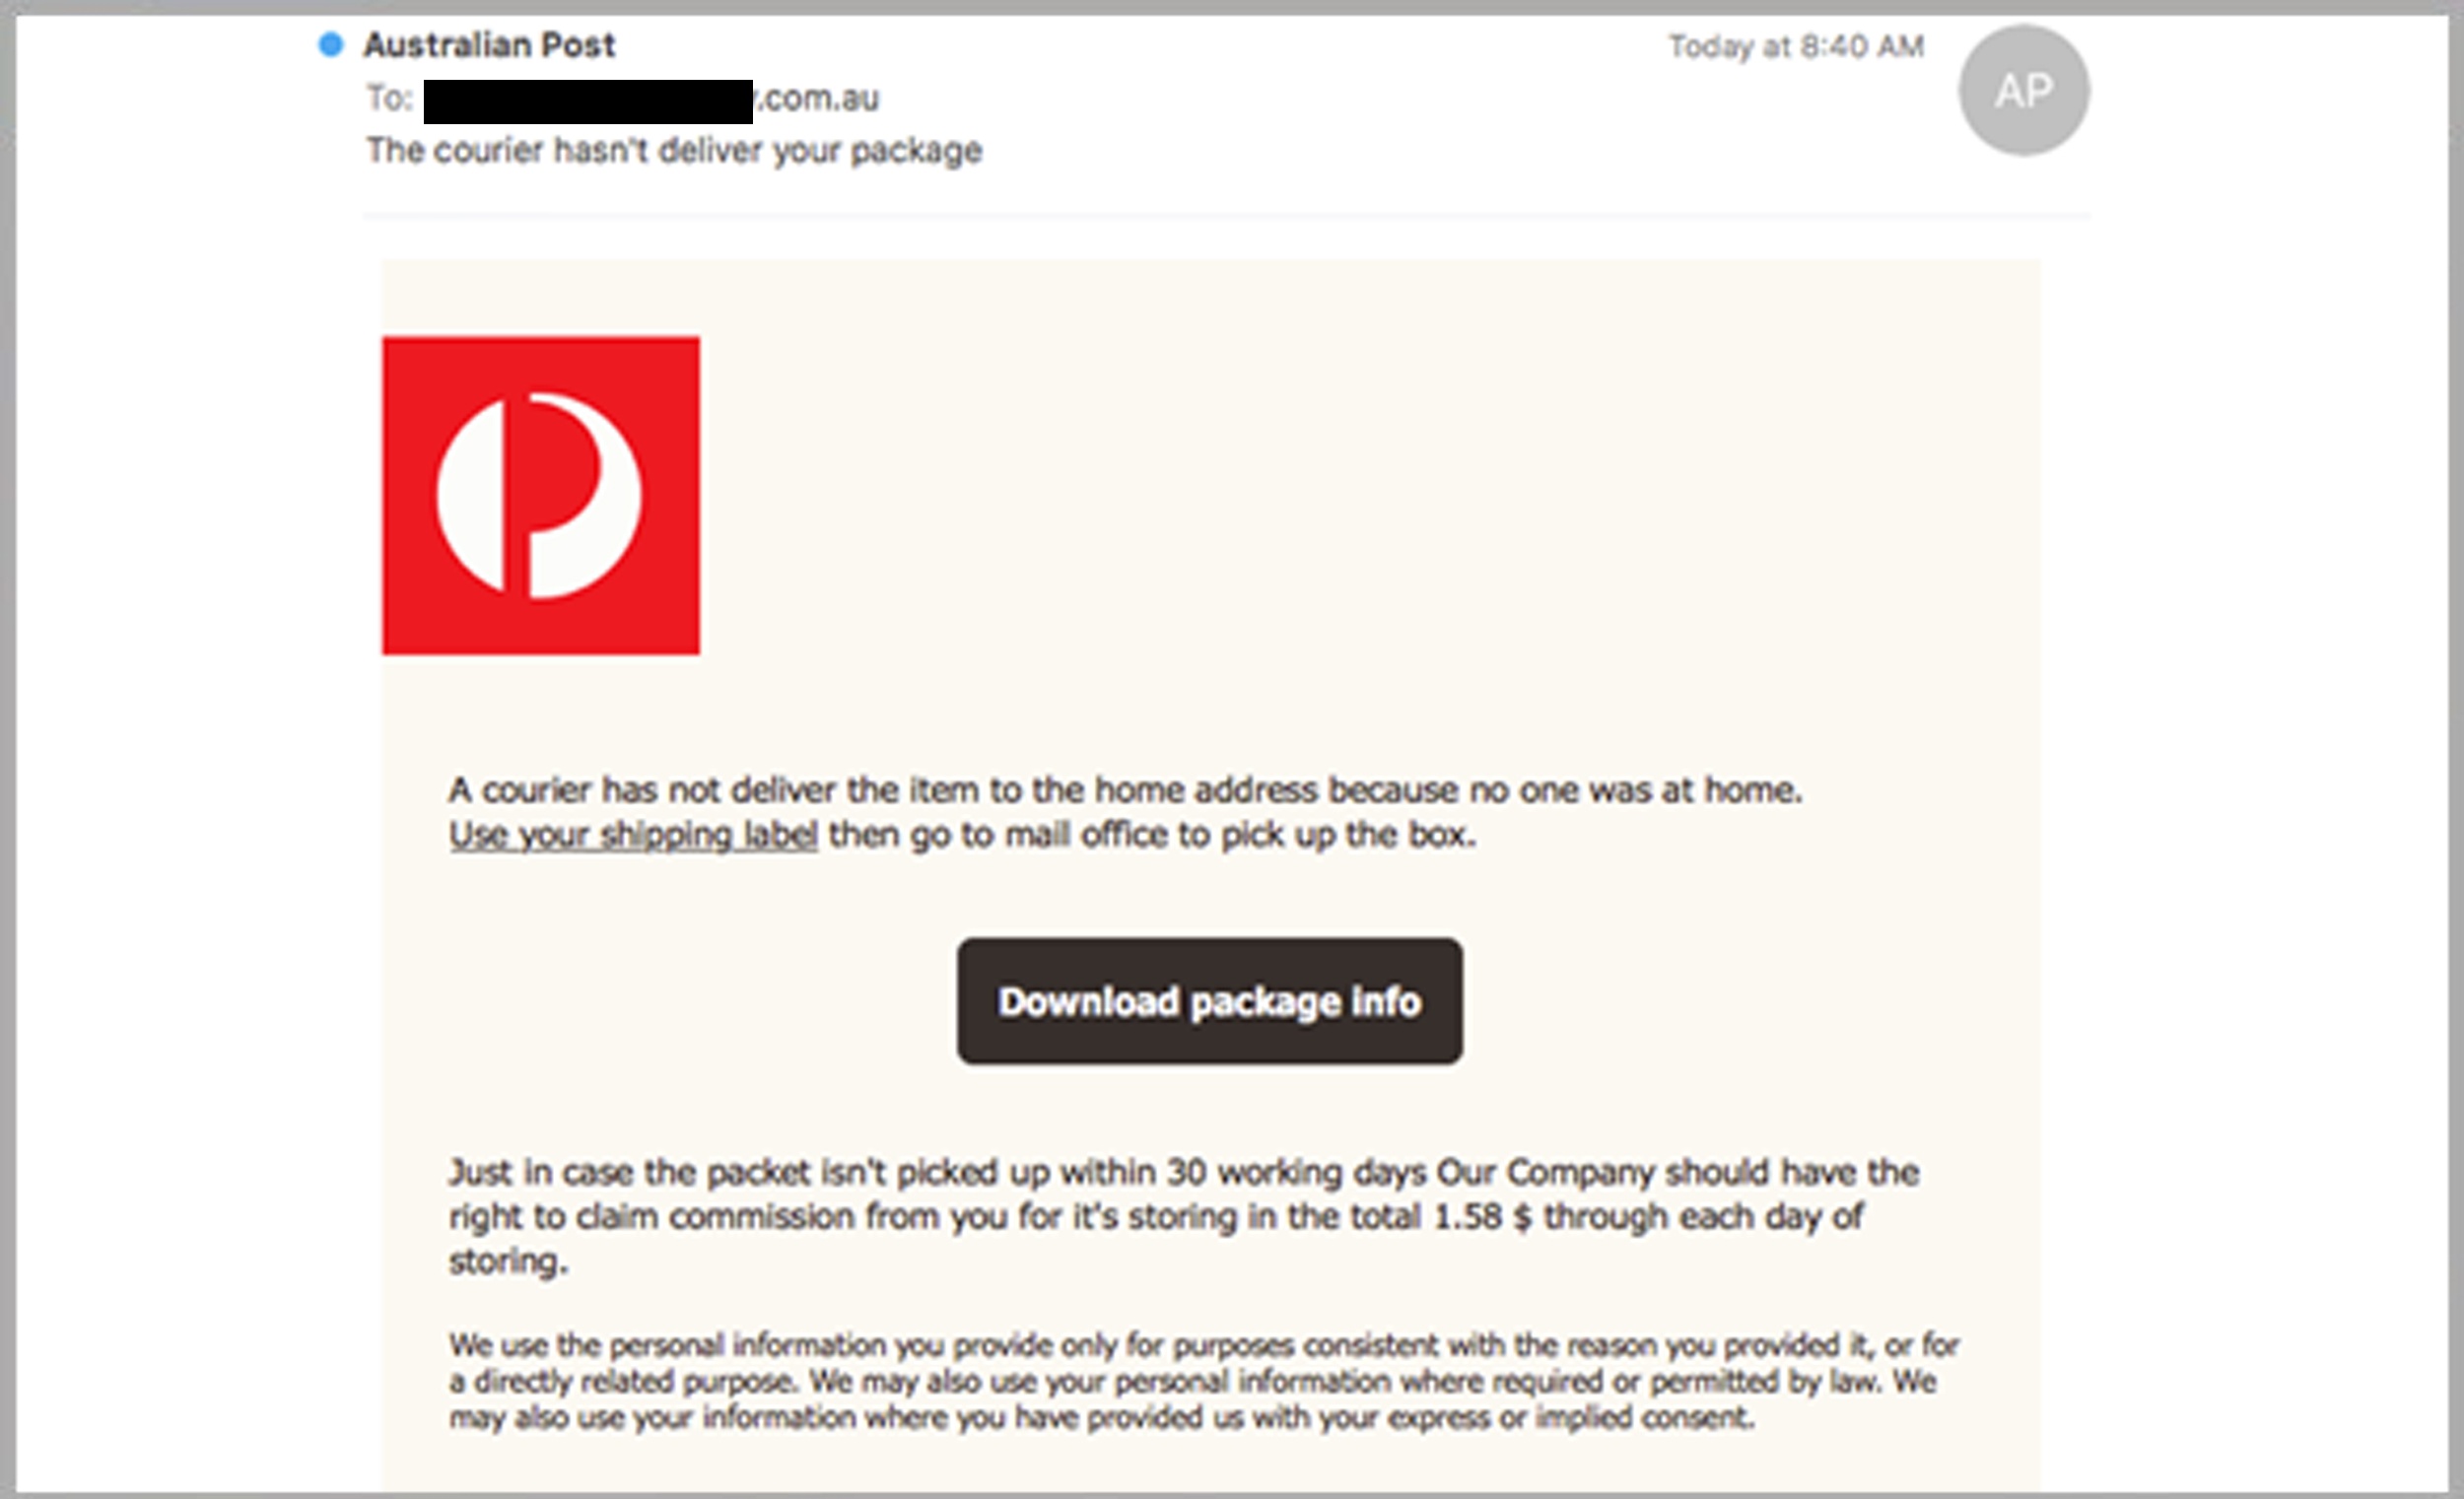 MailGuard_Fake_usPost_and_NZ_Post_Email_Scam_Email_Sample.jpg